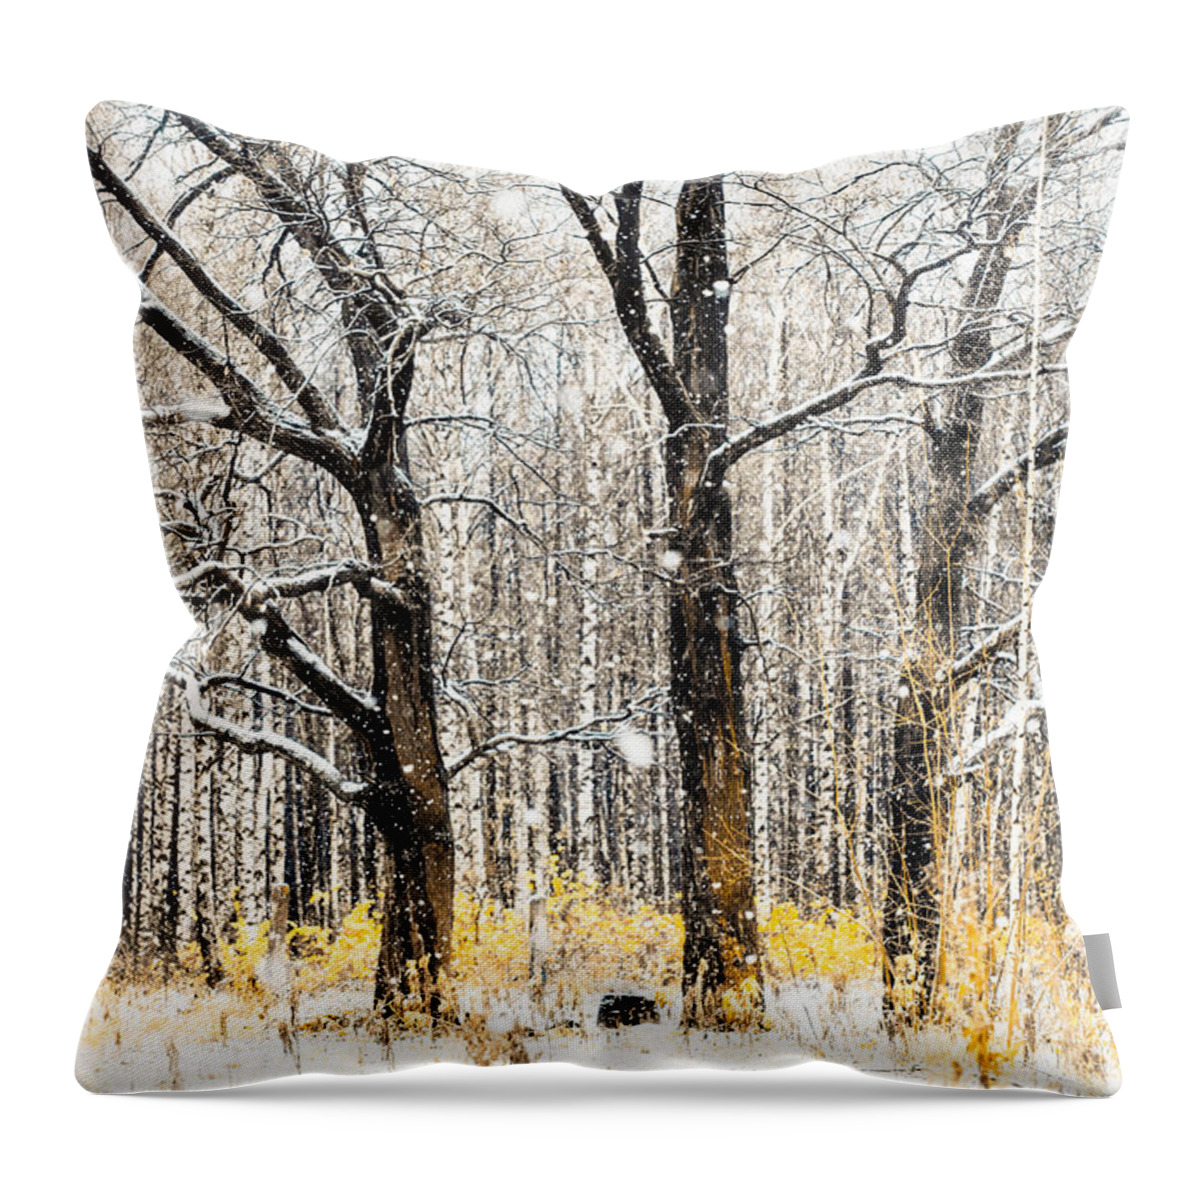 Snow Throw Pillow featuring the photograph First Snow. Tree Brothers by Jenny Rainbow